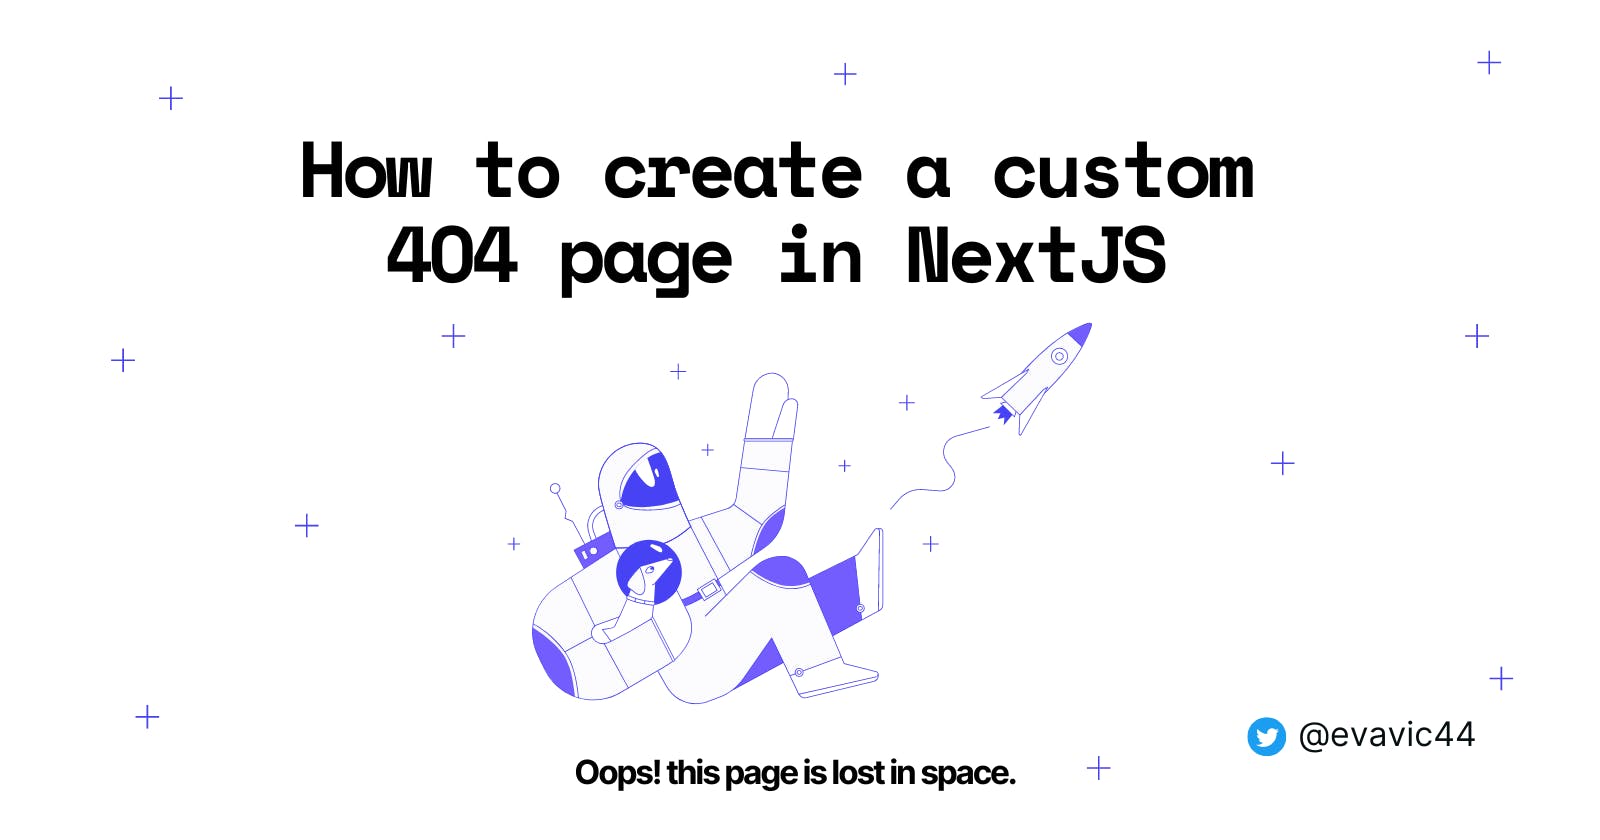 How to create a custom 404 page in NextJS